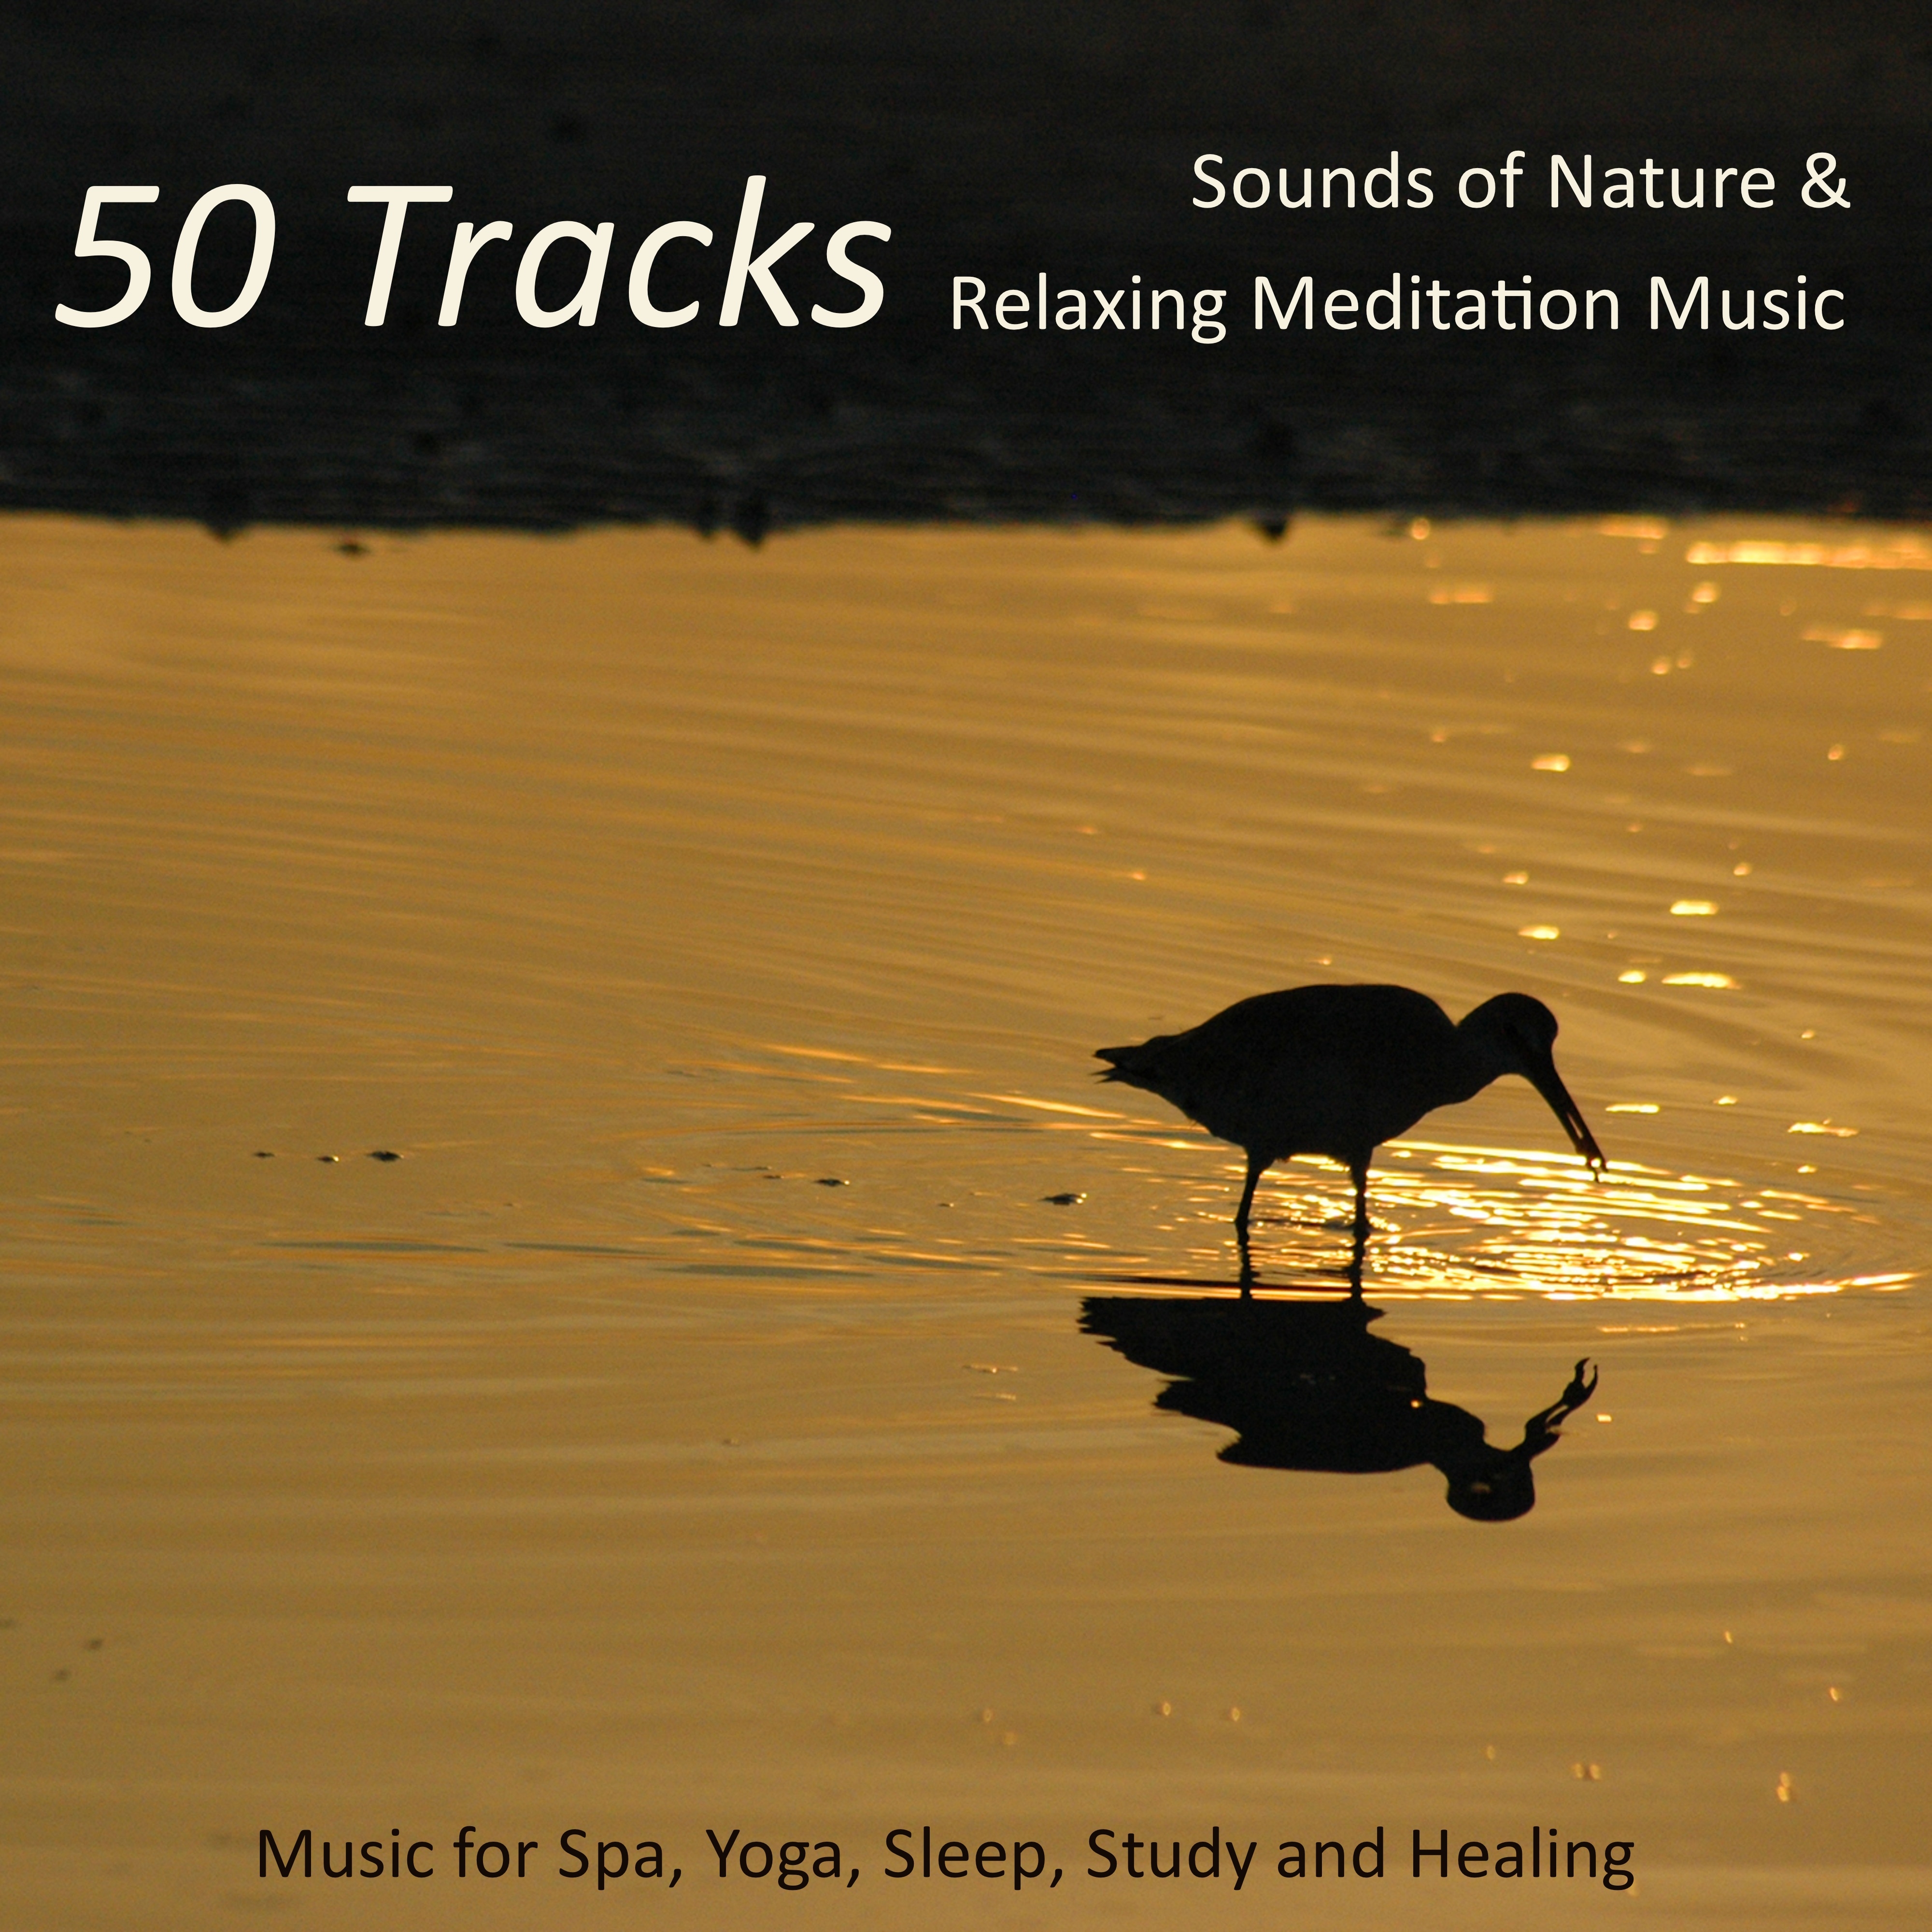 50 Tracks - Sounds of Nature & Relaxing Meditation Music for Spa, Yoga, Sleep, Study and Healing